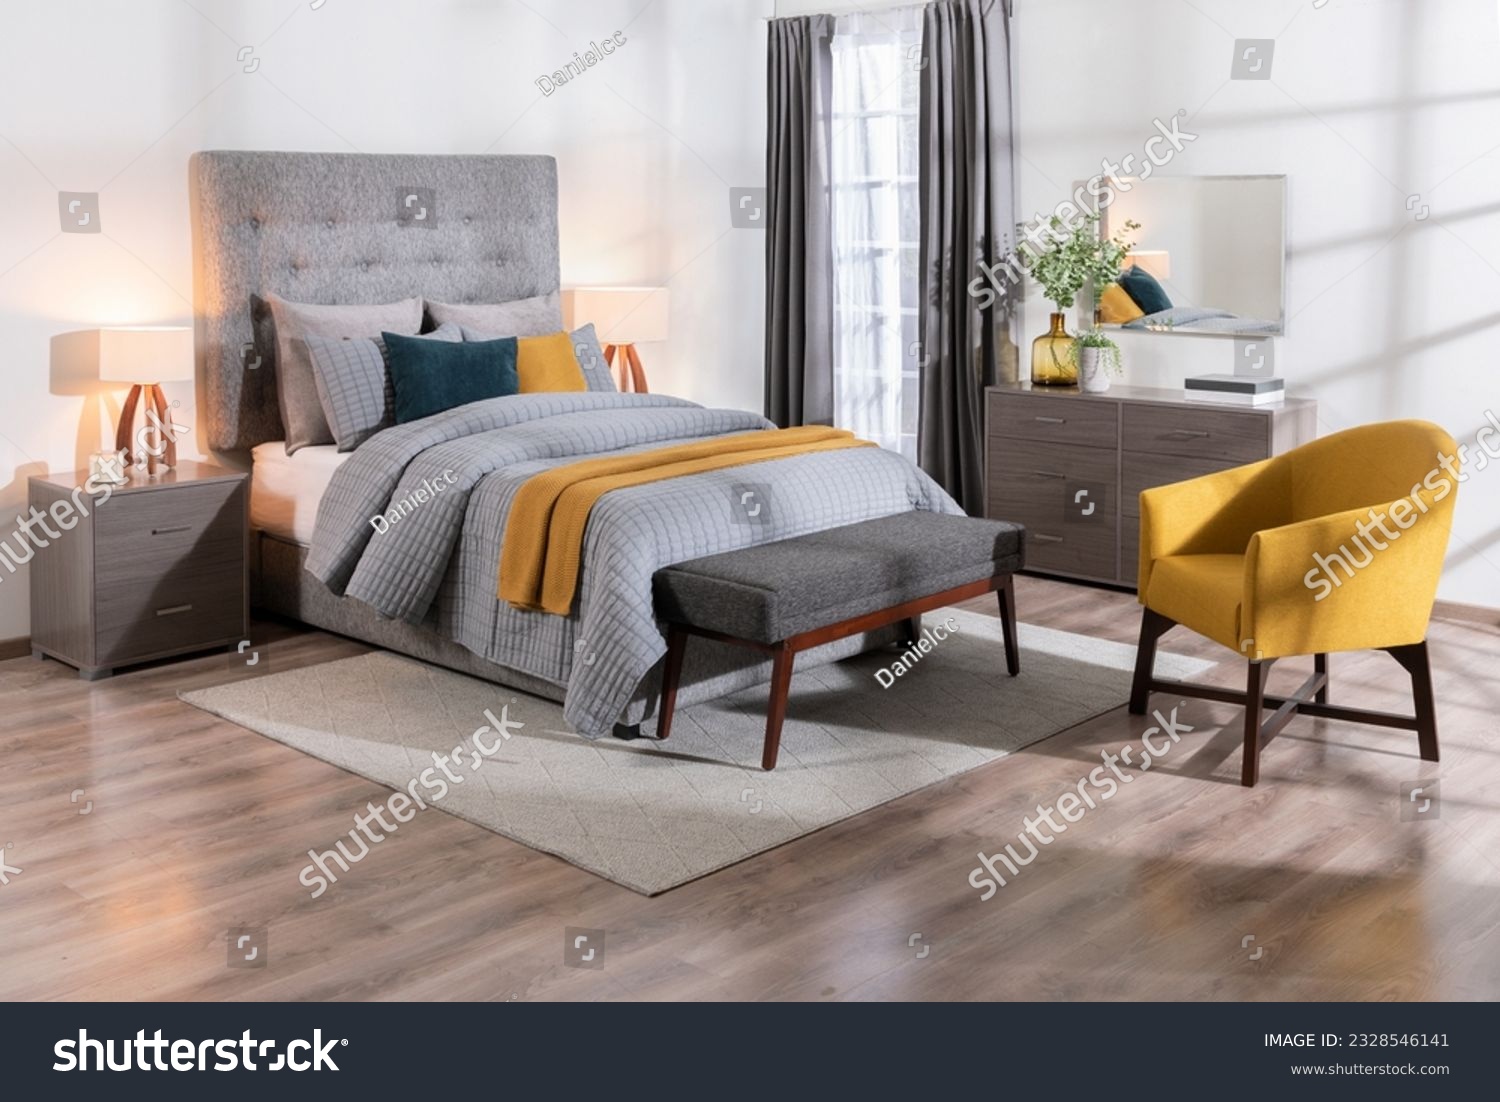 A modern bedroom featuring a large bed, a yellow chair, a dresser, and a wooden bench, a cozy interior space #2328546141